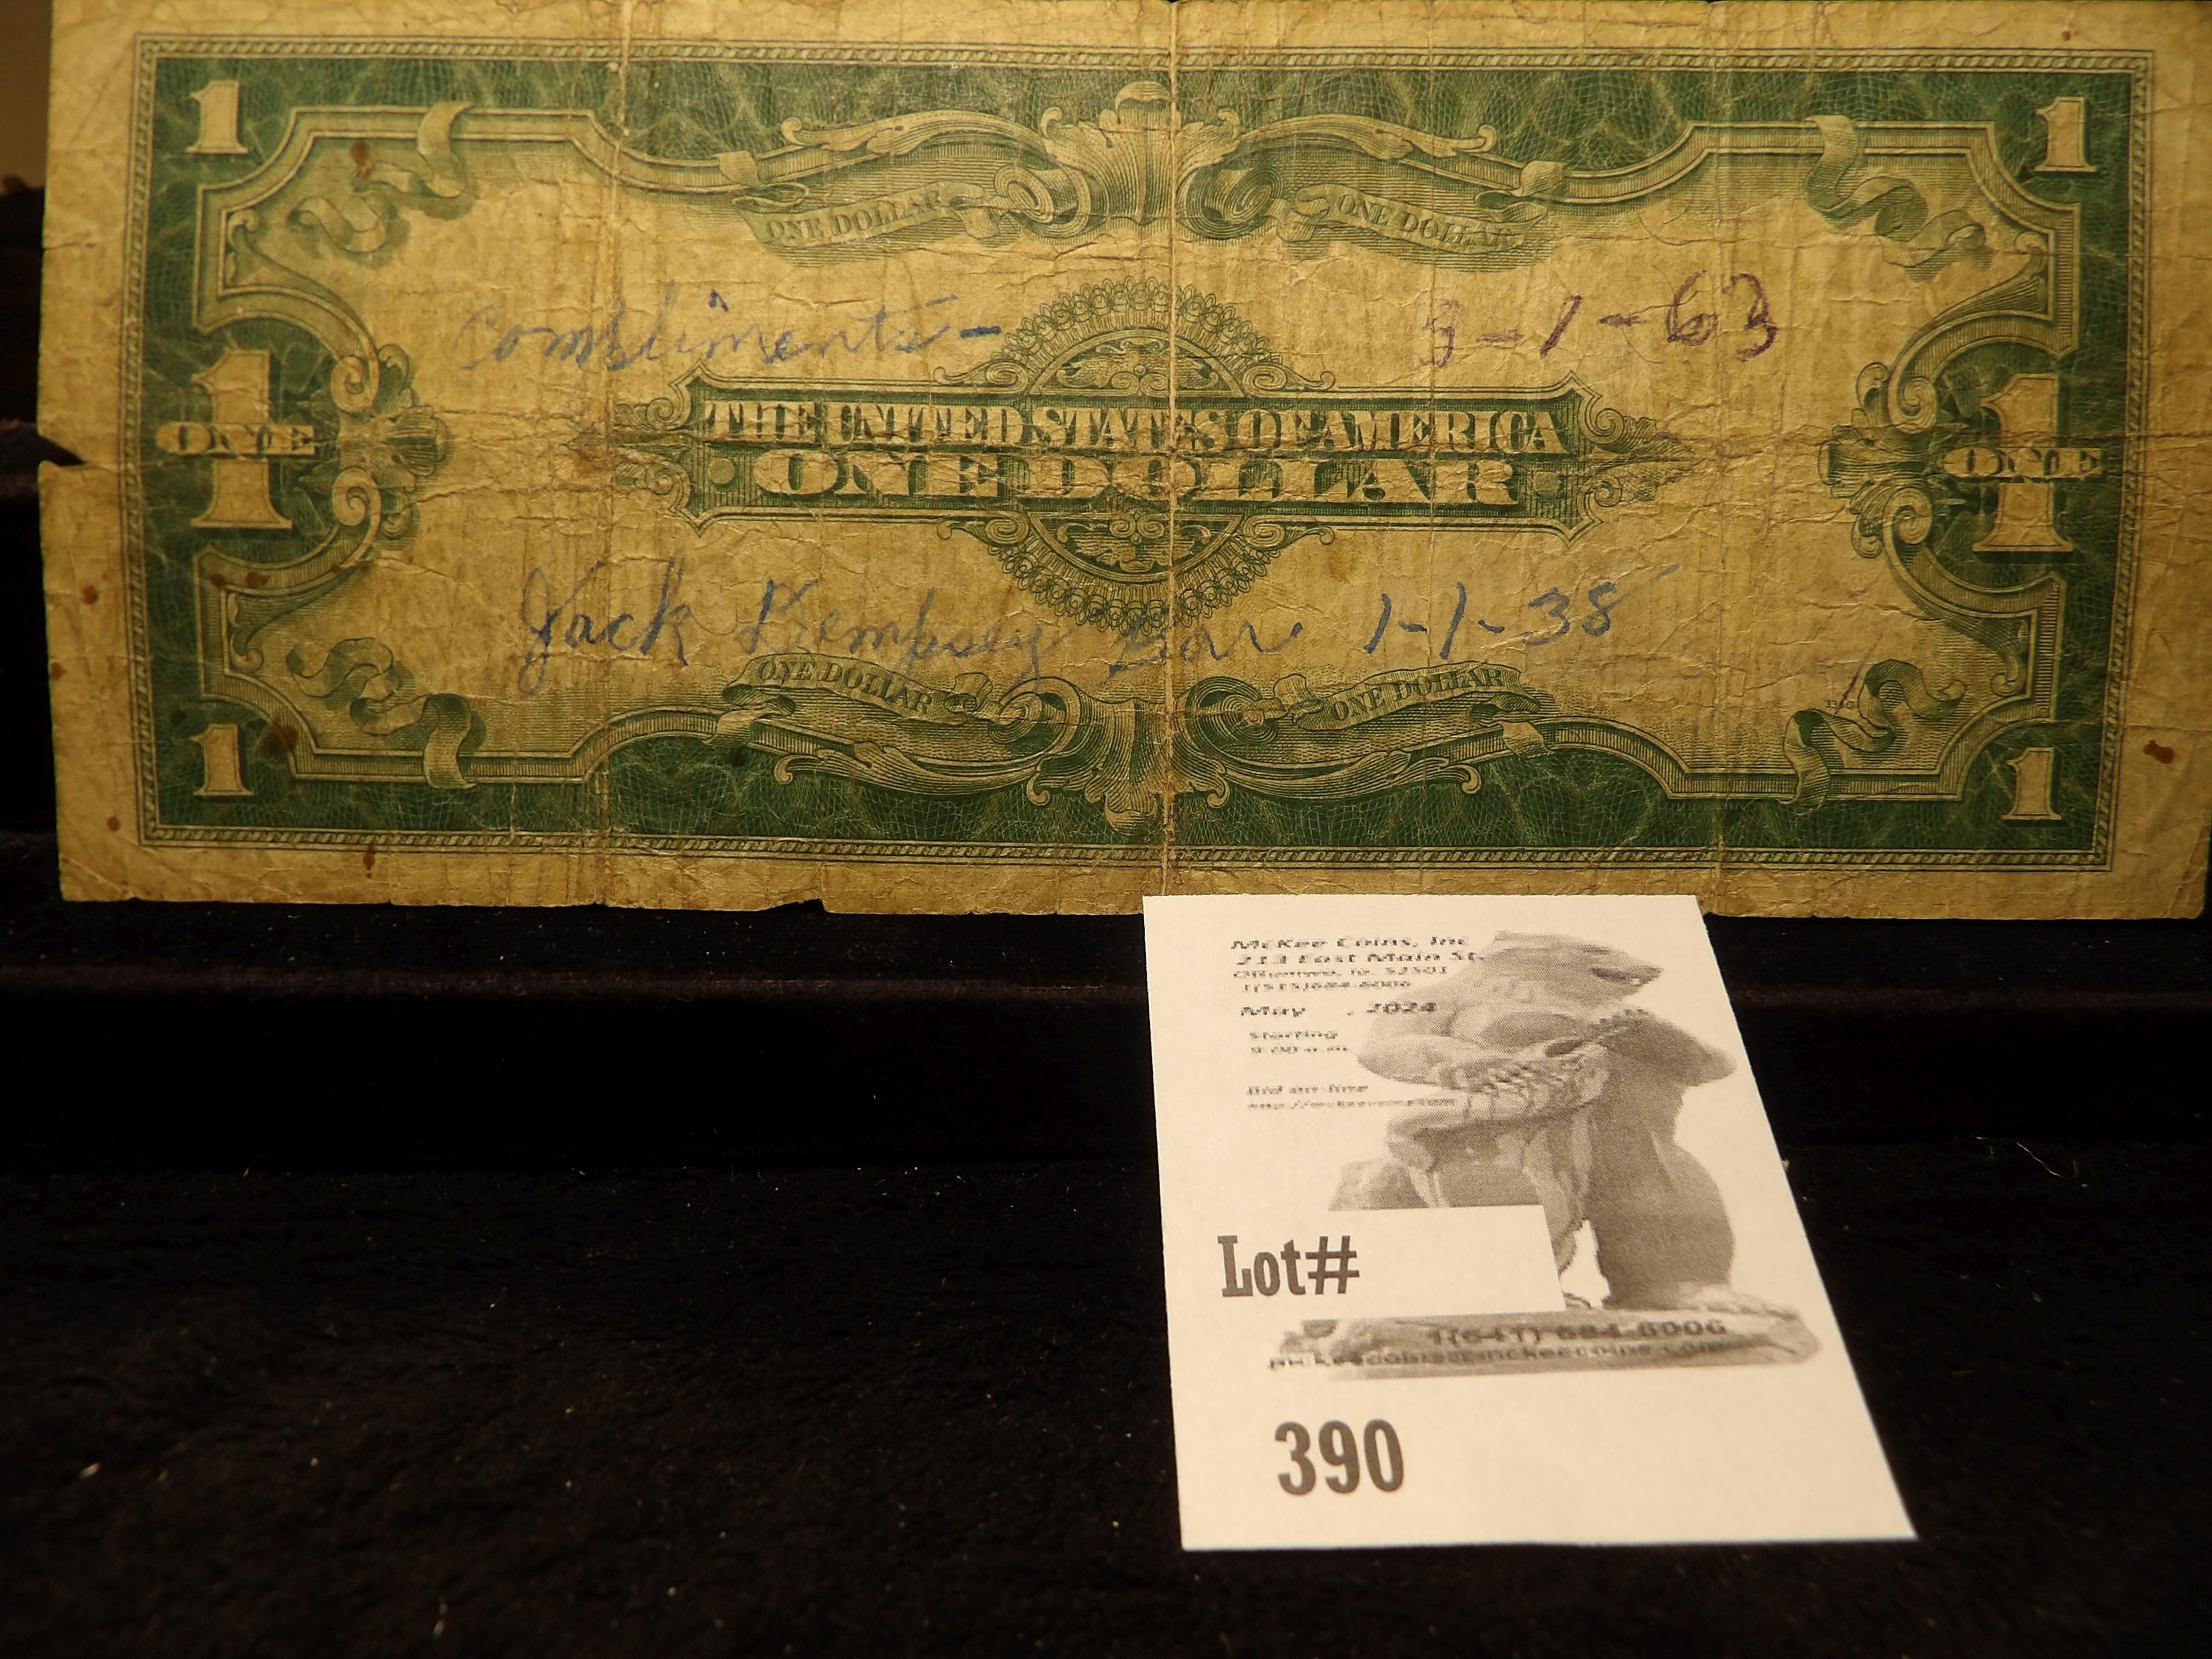 From Lyn Knight Auction March, 2017 comes Series 1923 One Dollar Silver Certificate. Signed Speelman